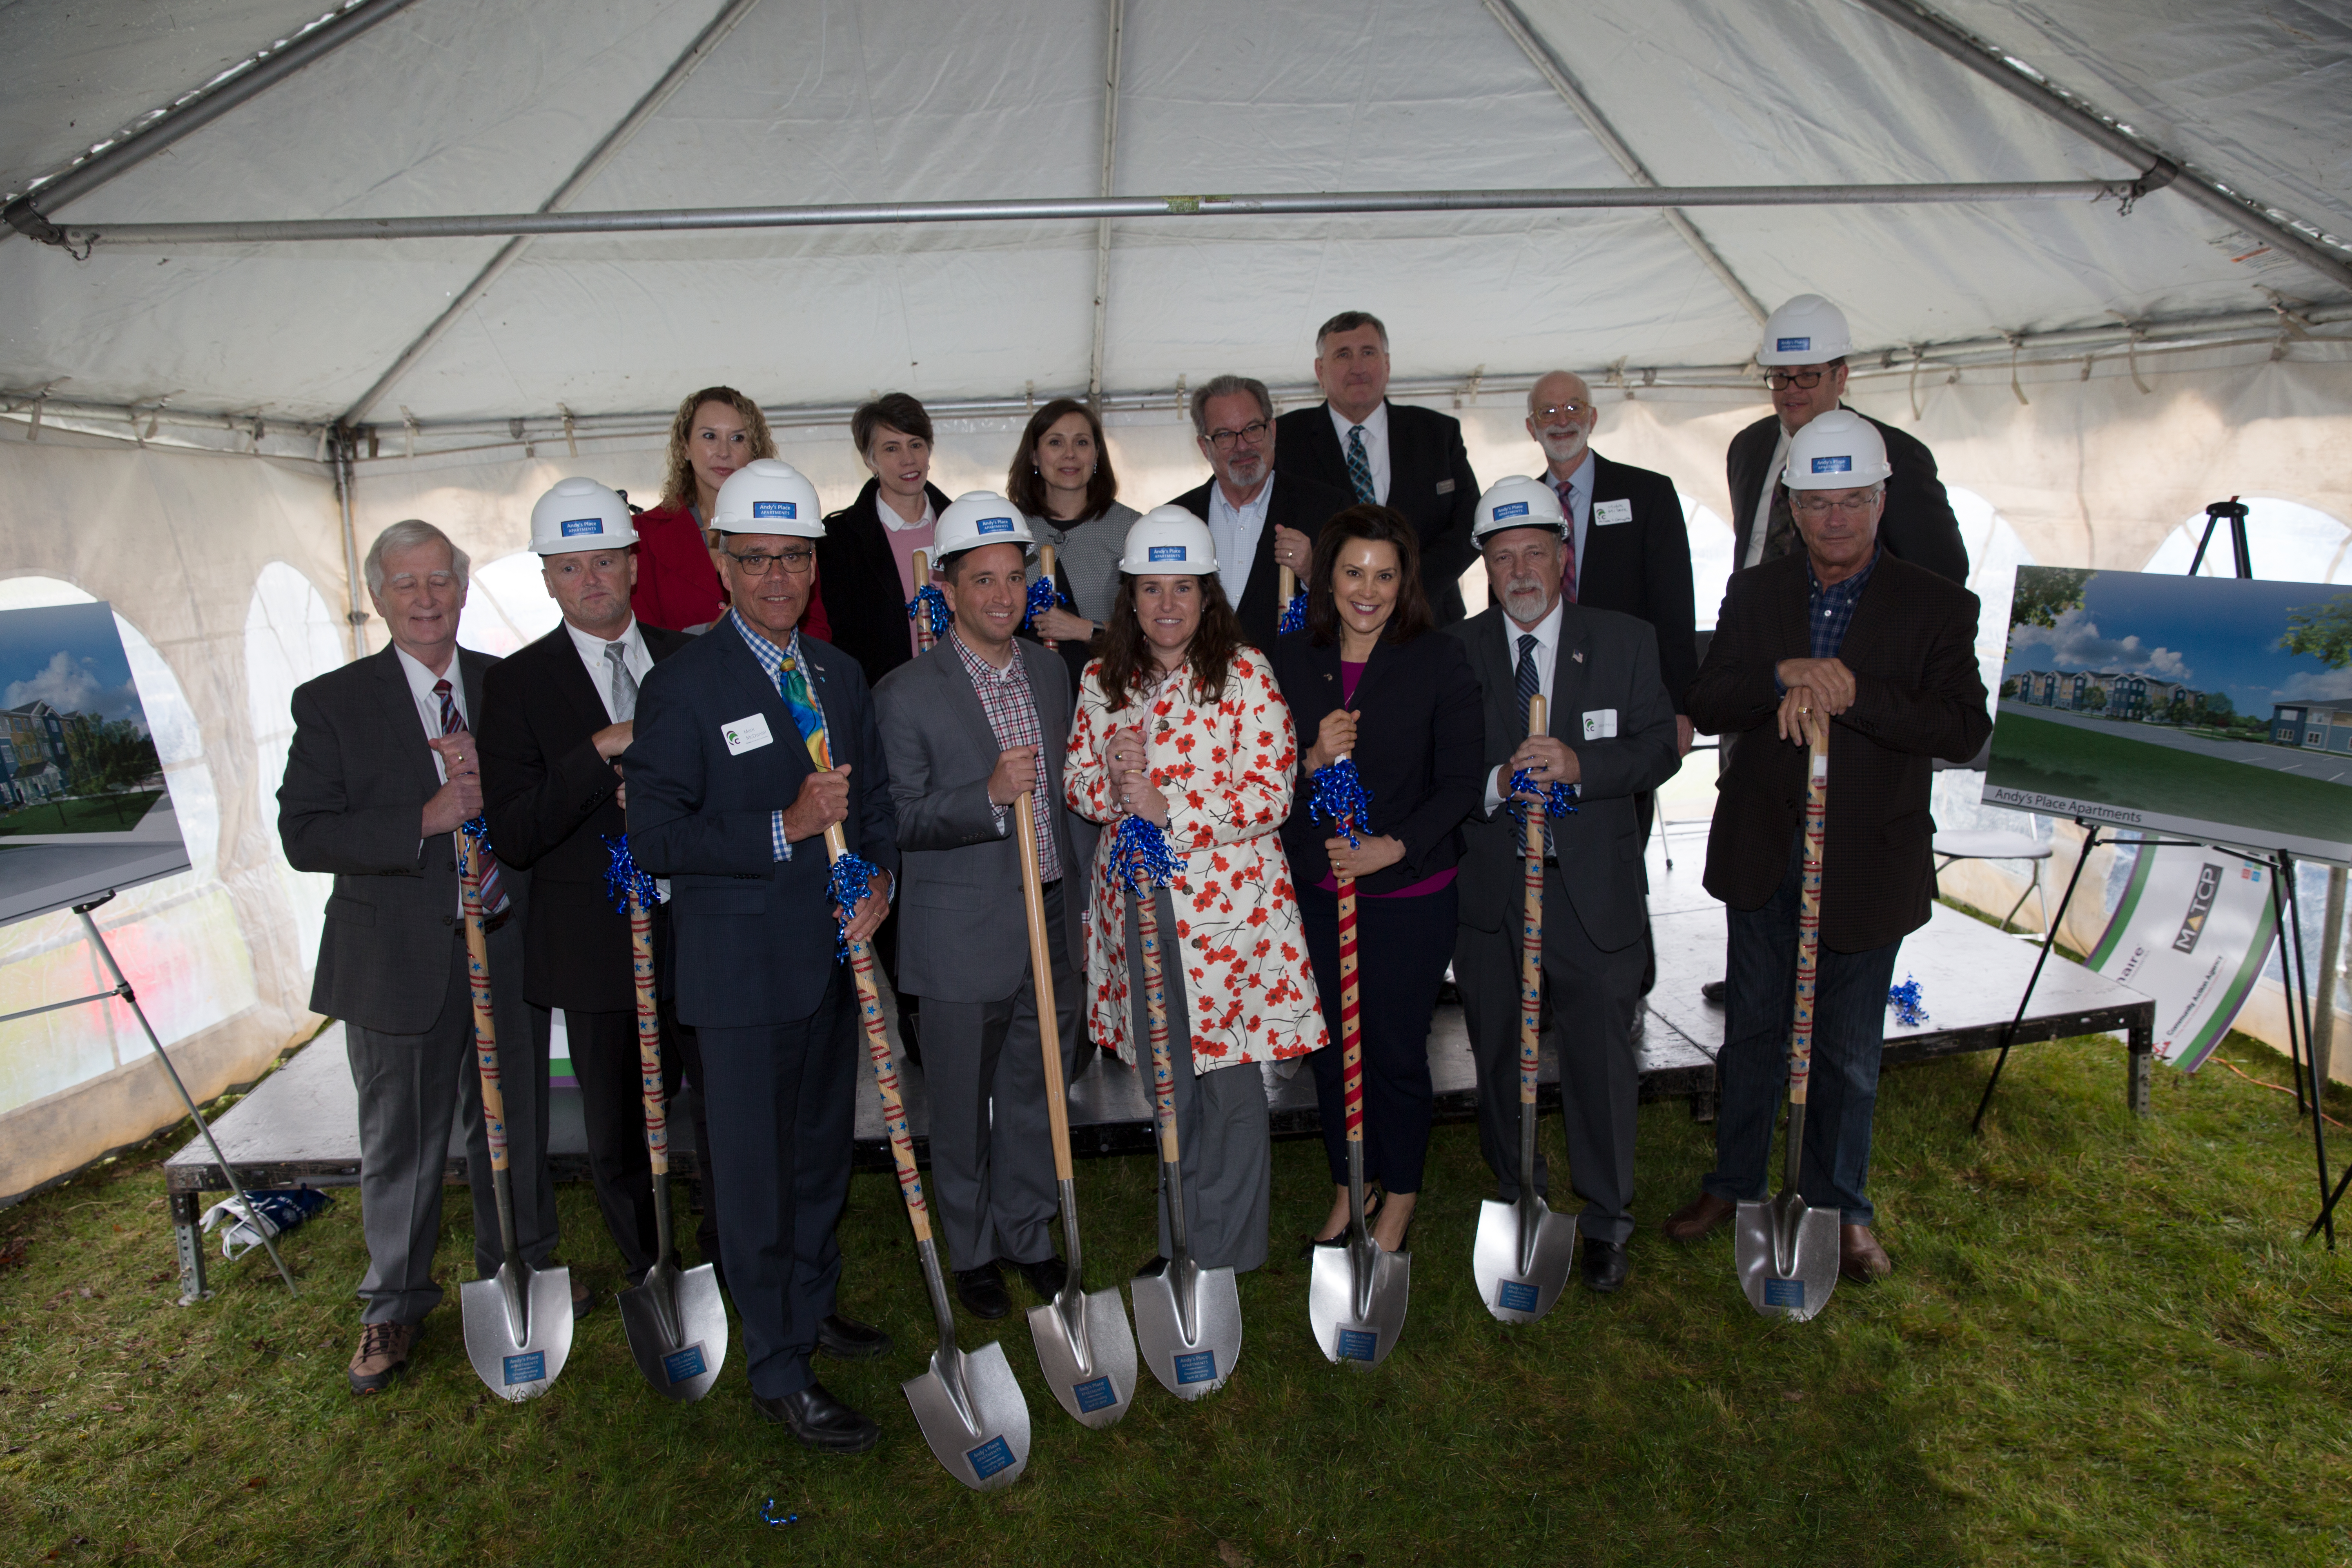 Governor Whitmer, Senator Shirkey Join Community Leaders to Celebrate Groundbreaking of Andy’s Place